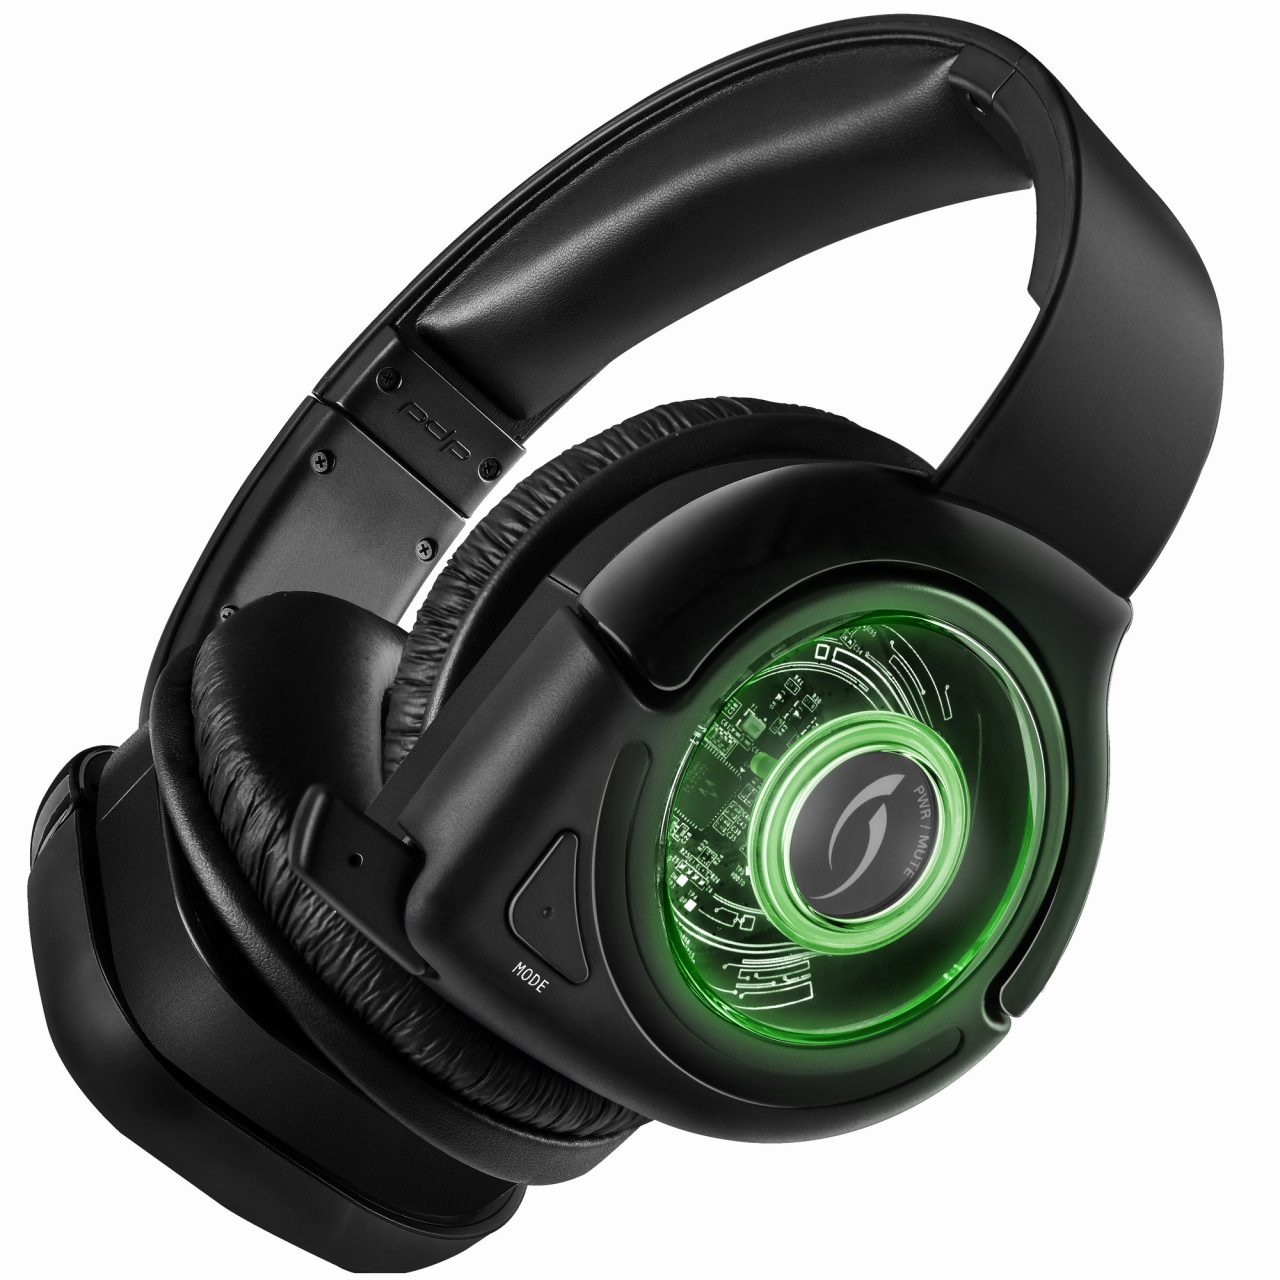 barsten Wet en regelgeving Gestaag Accessory Review: PDP Afterglow AG 7 Wireless Headset for Xbox One | Pure  Xbox